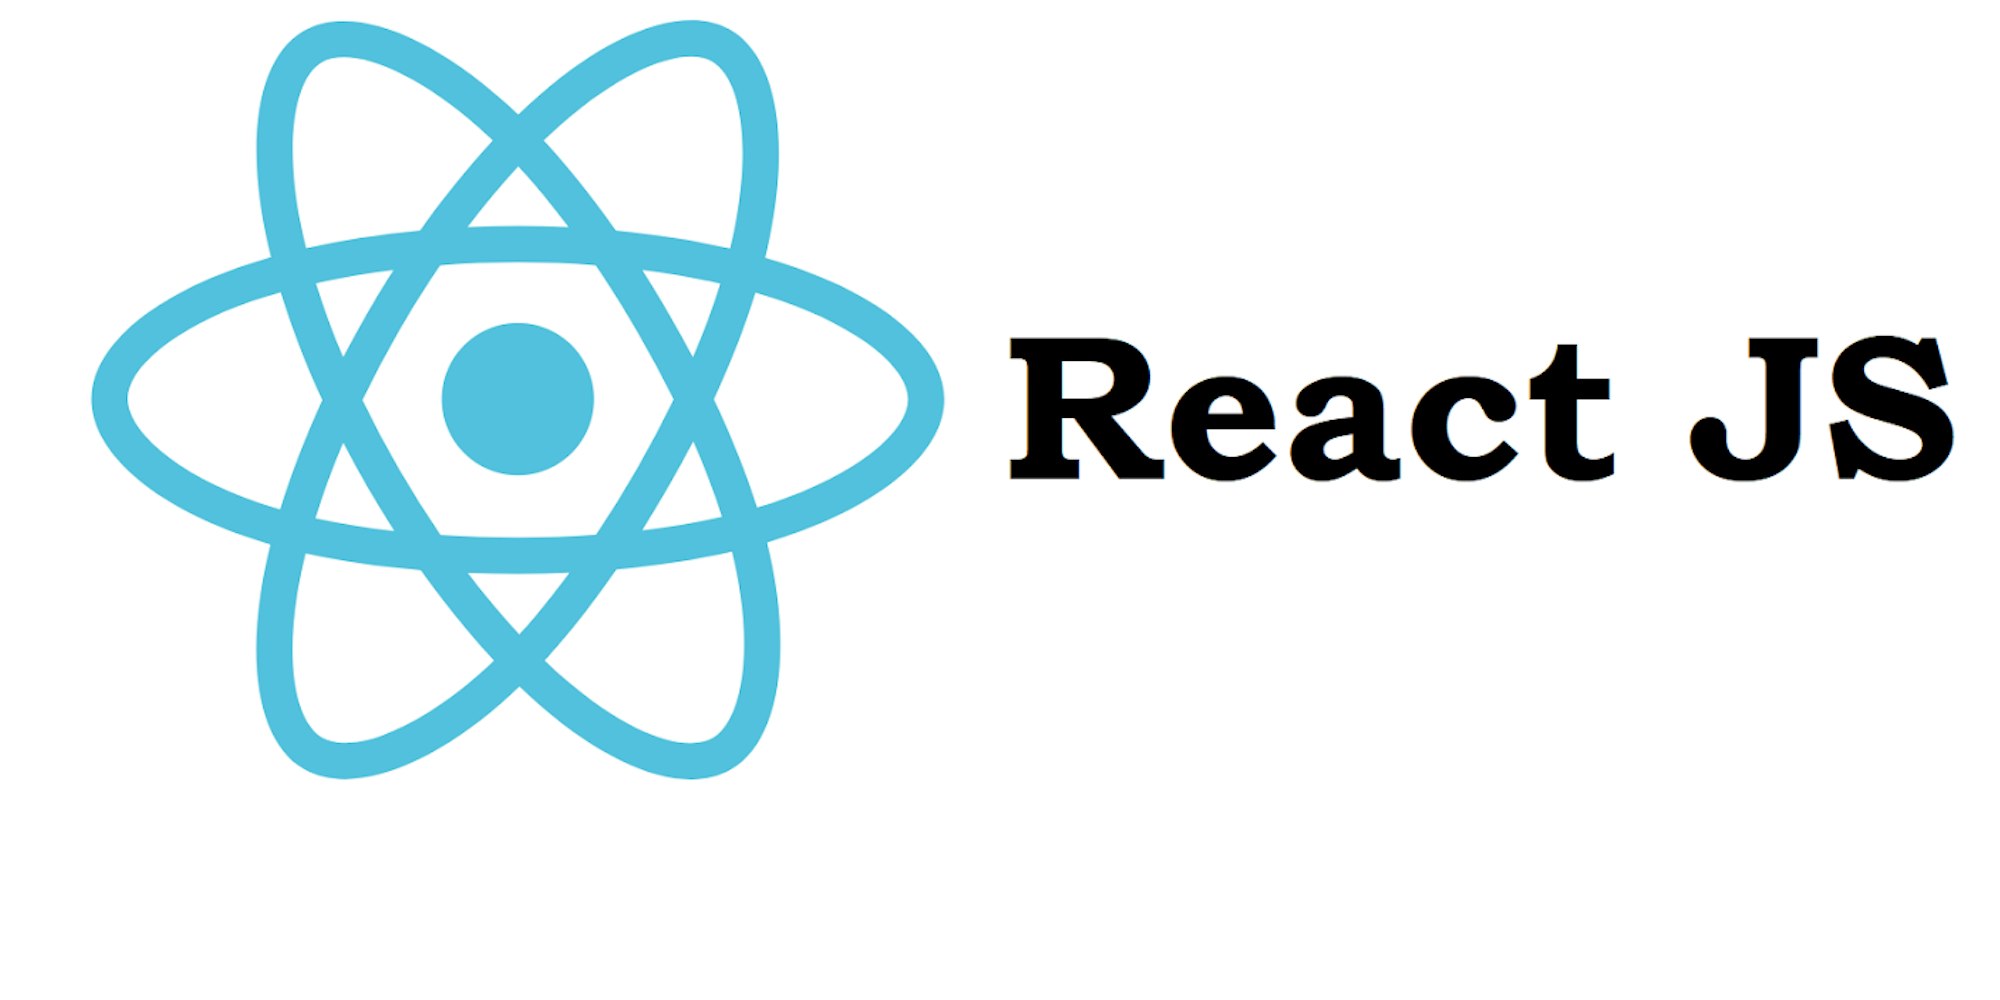 Cover Image for The Advantages of Using React in Your Front-End Project